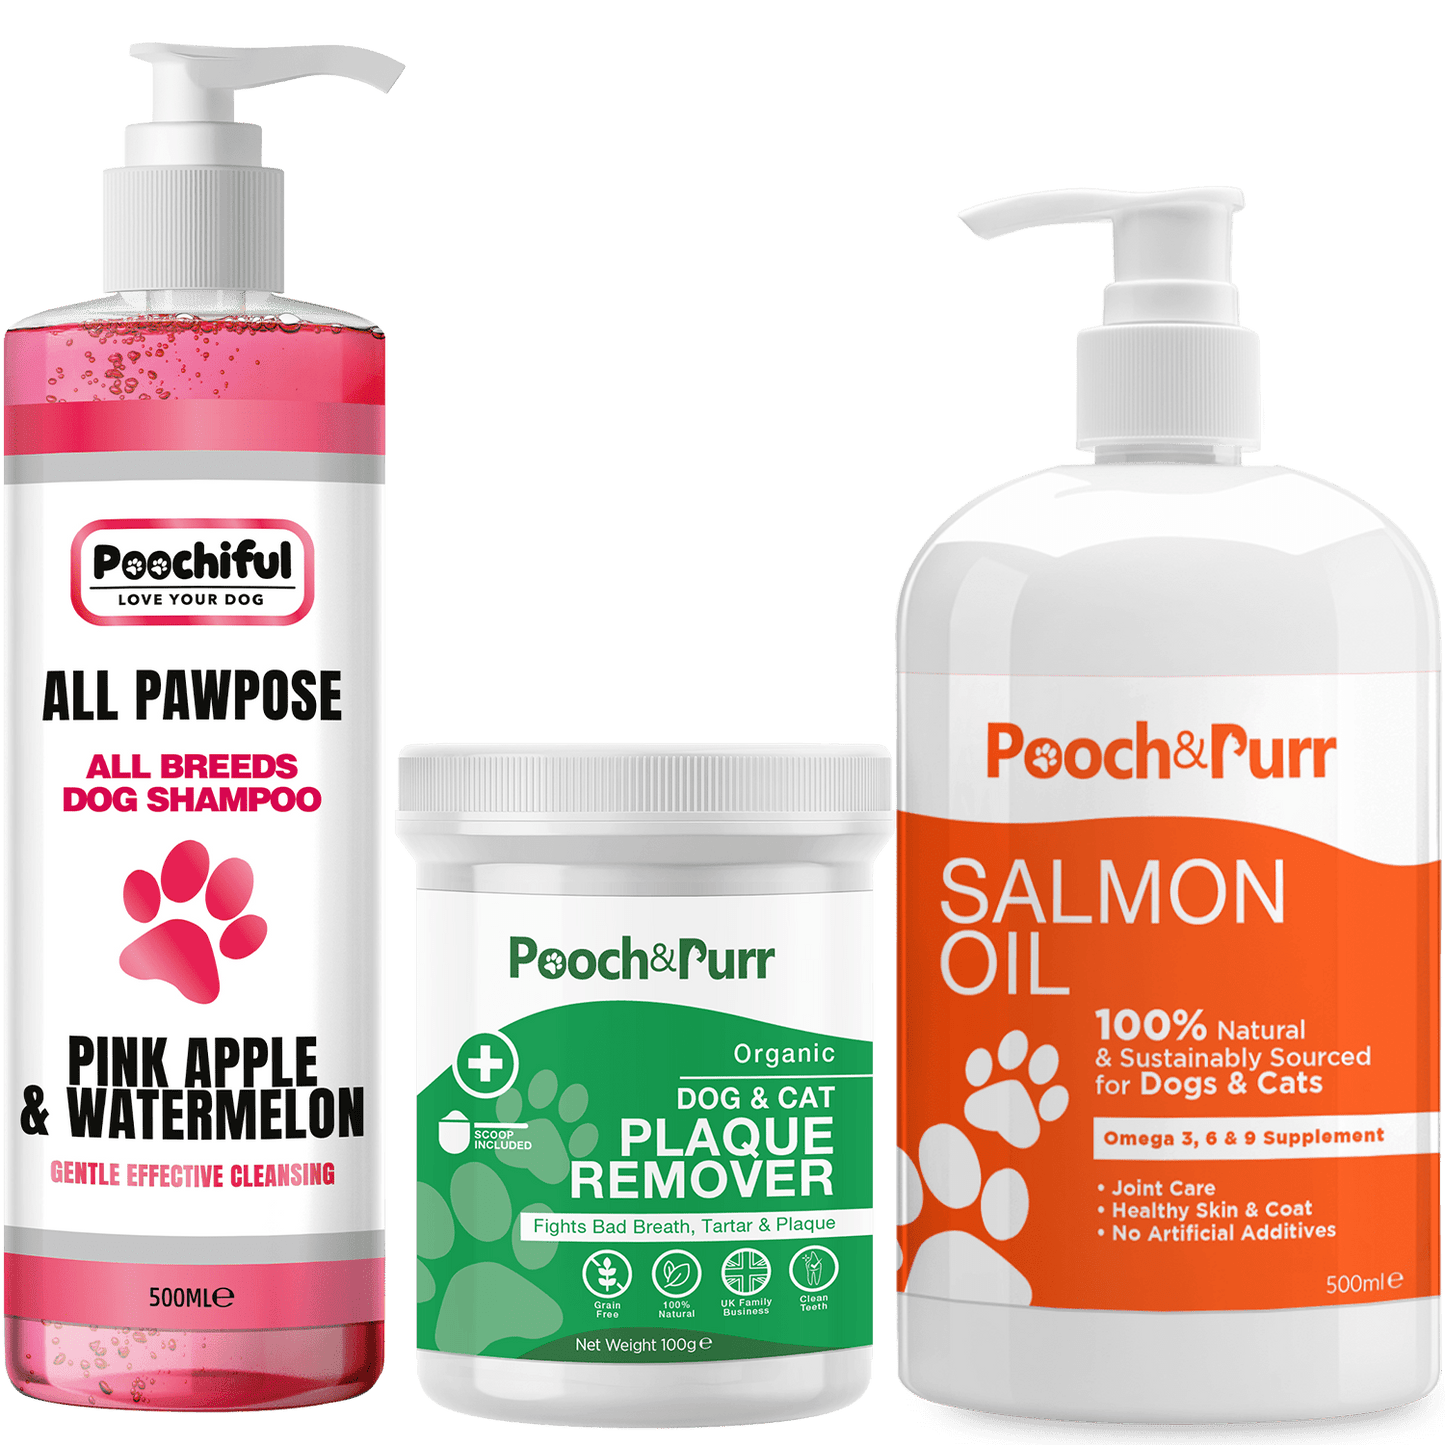 All Pawpose 500ml + Pooch And Purr Salmon Oil 500ml + Plaque Powder 100g Bundle